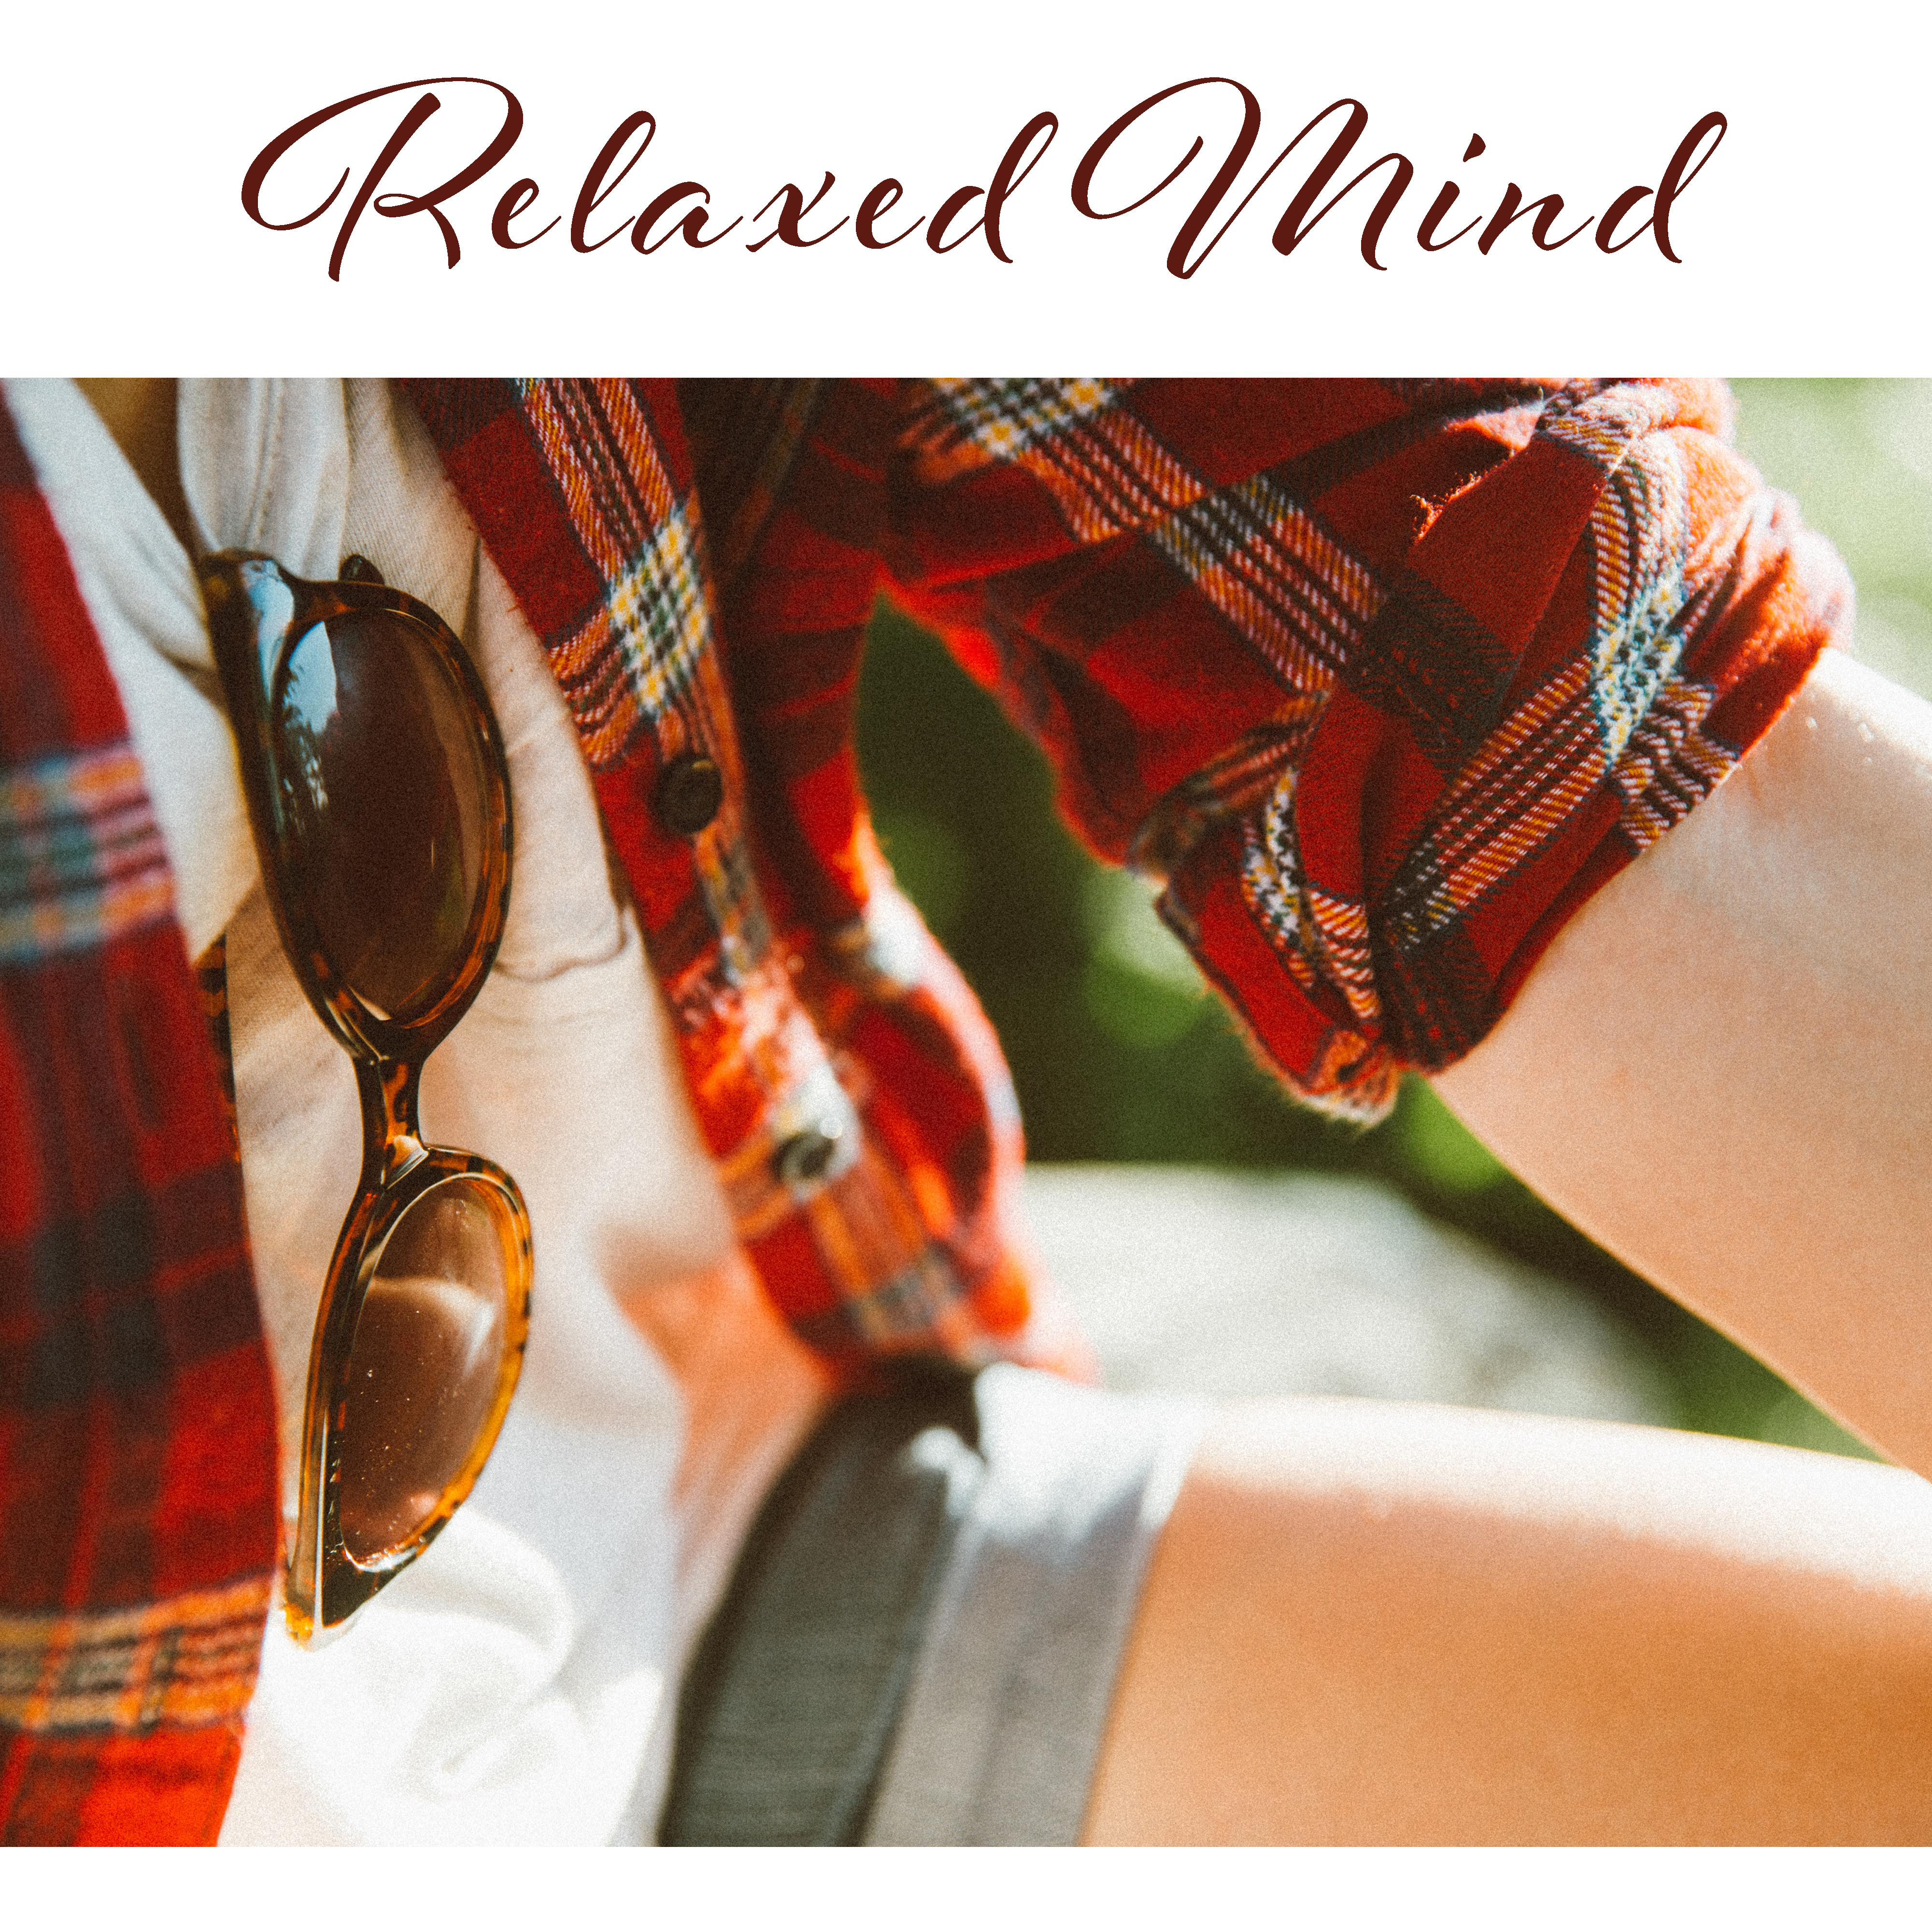 Relaxed Mind  New Age Music to Rest, Soothing Sounds, Soft Melodies Reduce Stress, Ambient Music